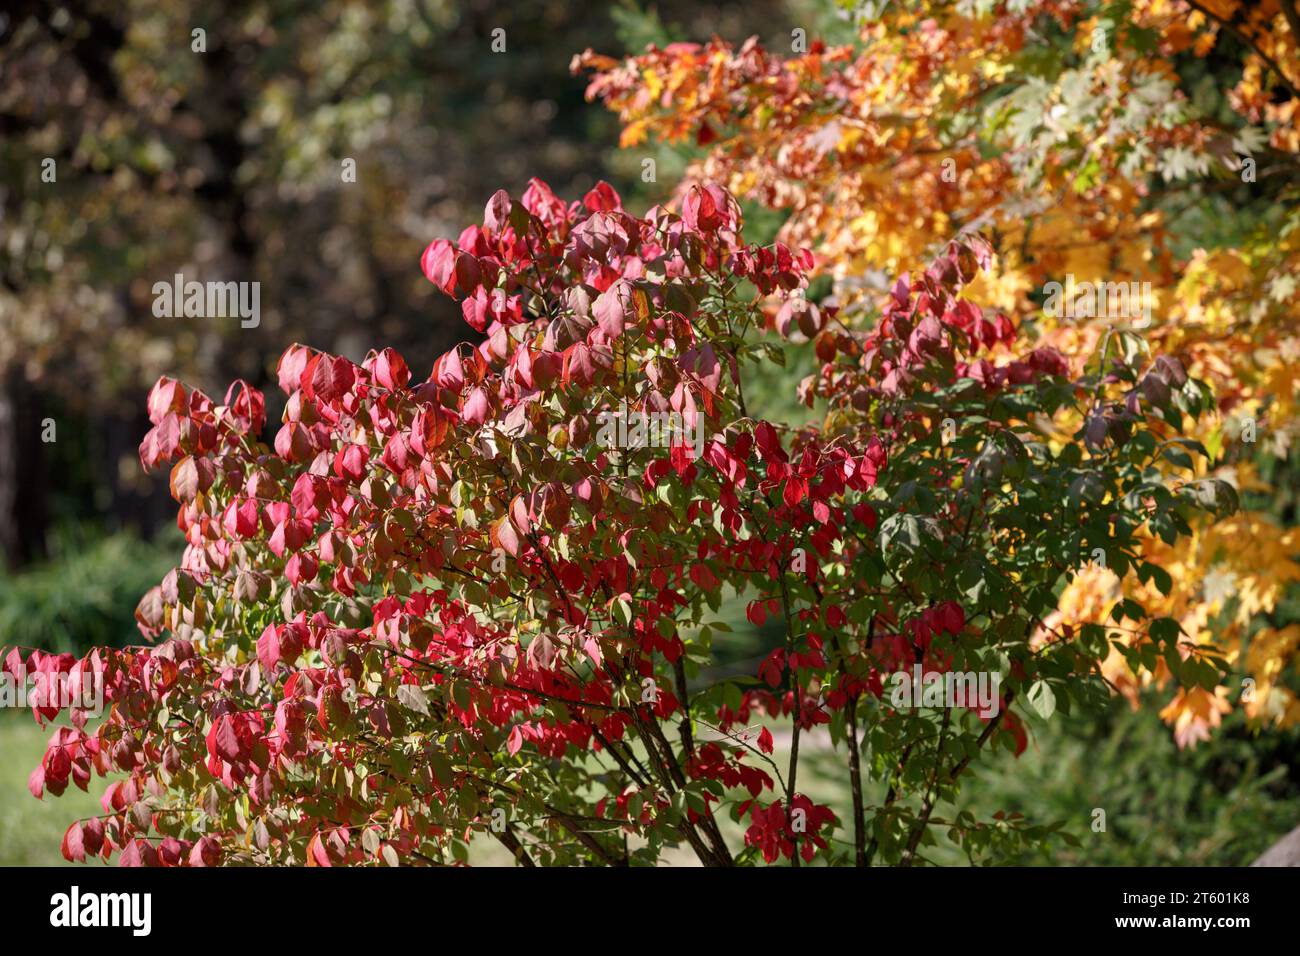 Multicolored foliage of autumn trees and shrubs. Sunny autumn day in nature. Climate and seasons of the year Stock Photo